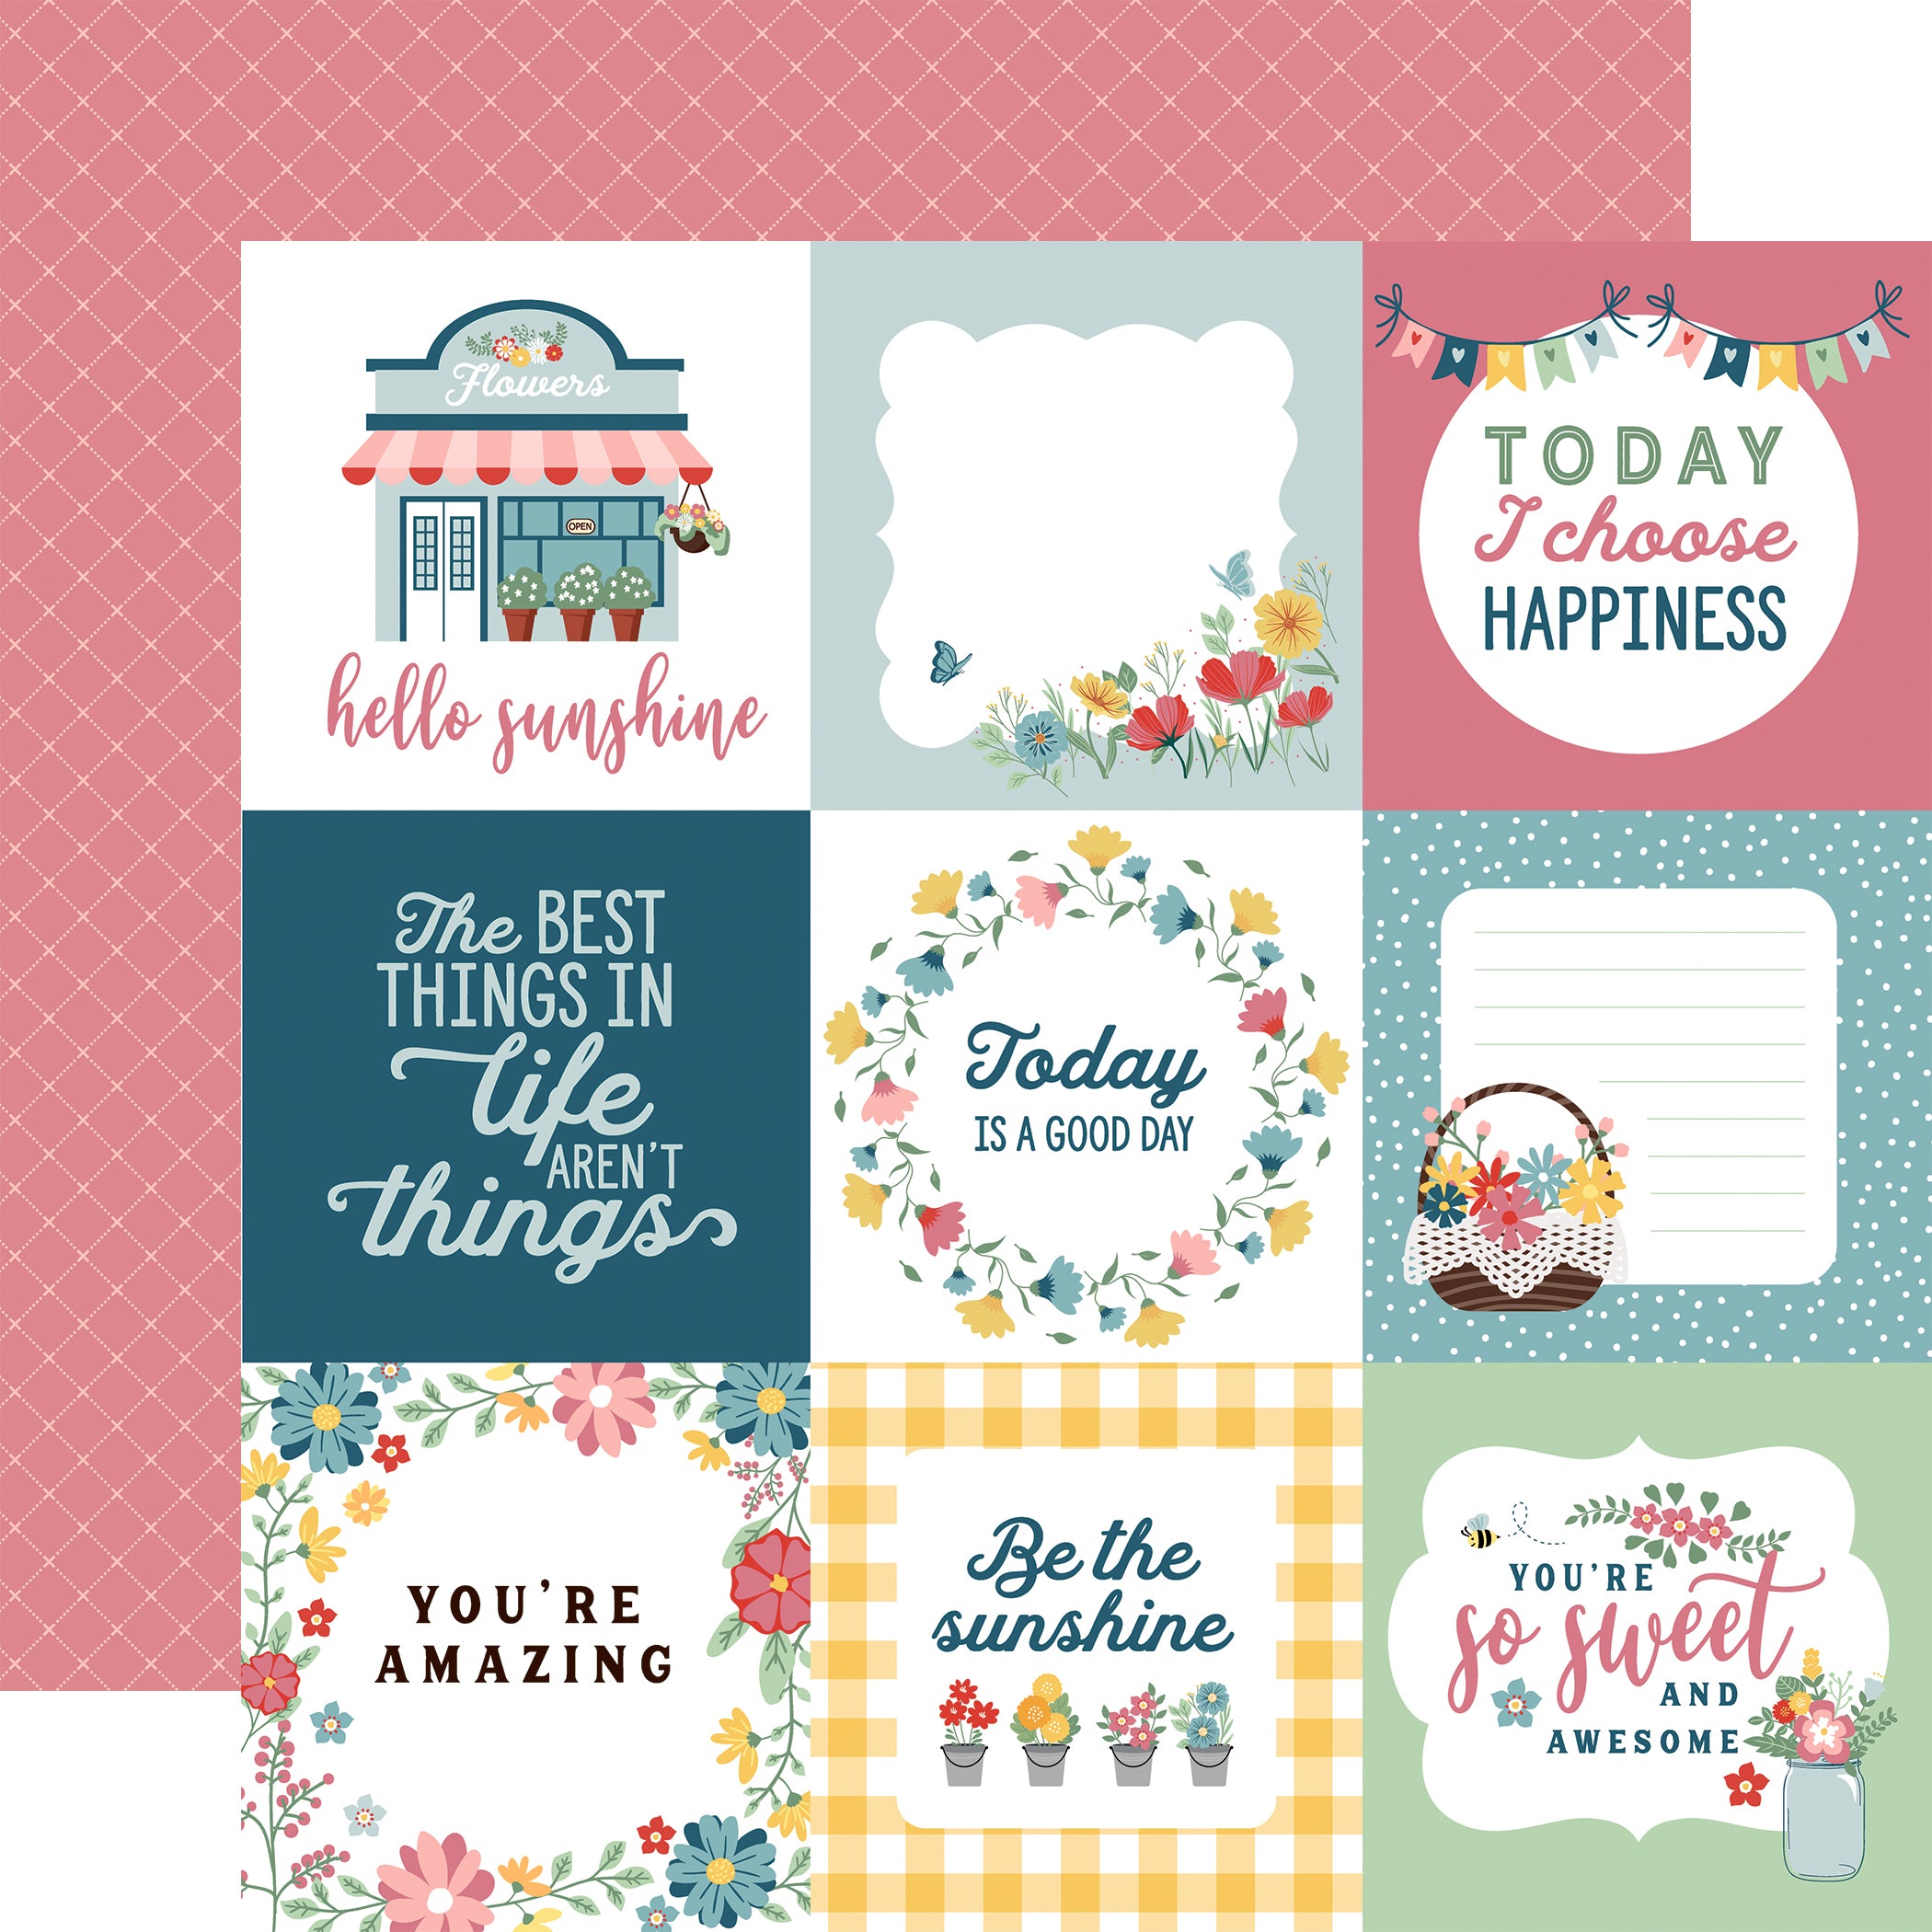 Life Is Beautiful Collection 12 x 12 Scrapbook Collection Pack by Echo Park Paper